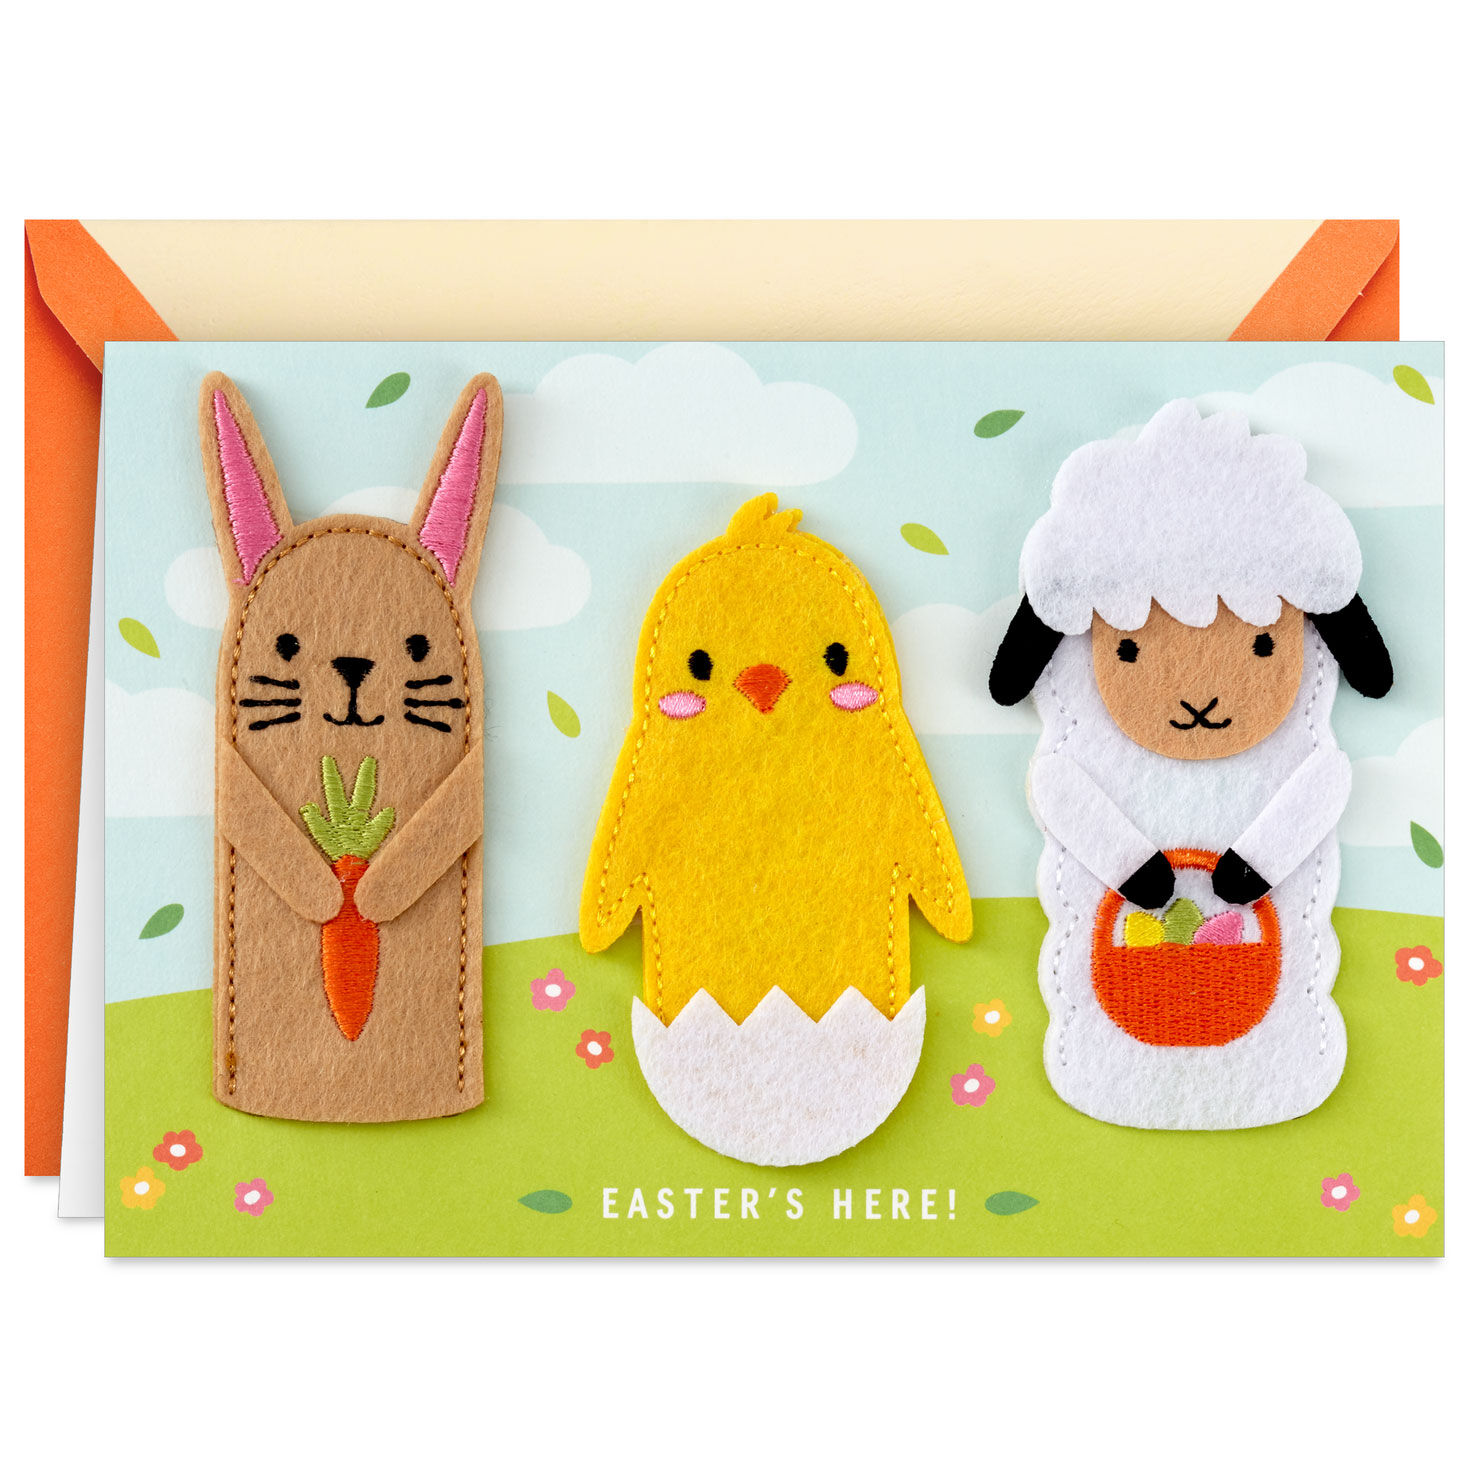 Treats and Sunshine Easter Card With Felt Finger Puppets for only USD 8.99 | Hallmark